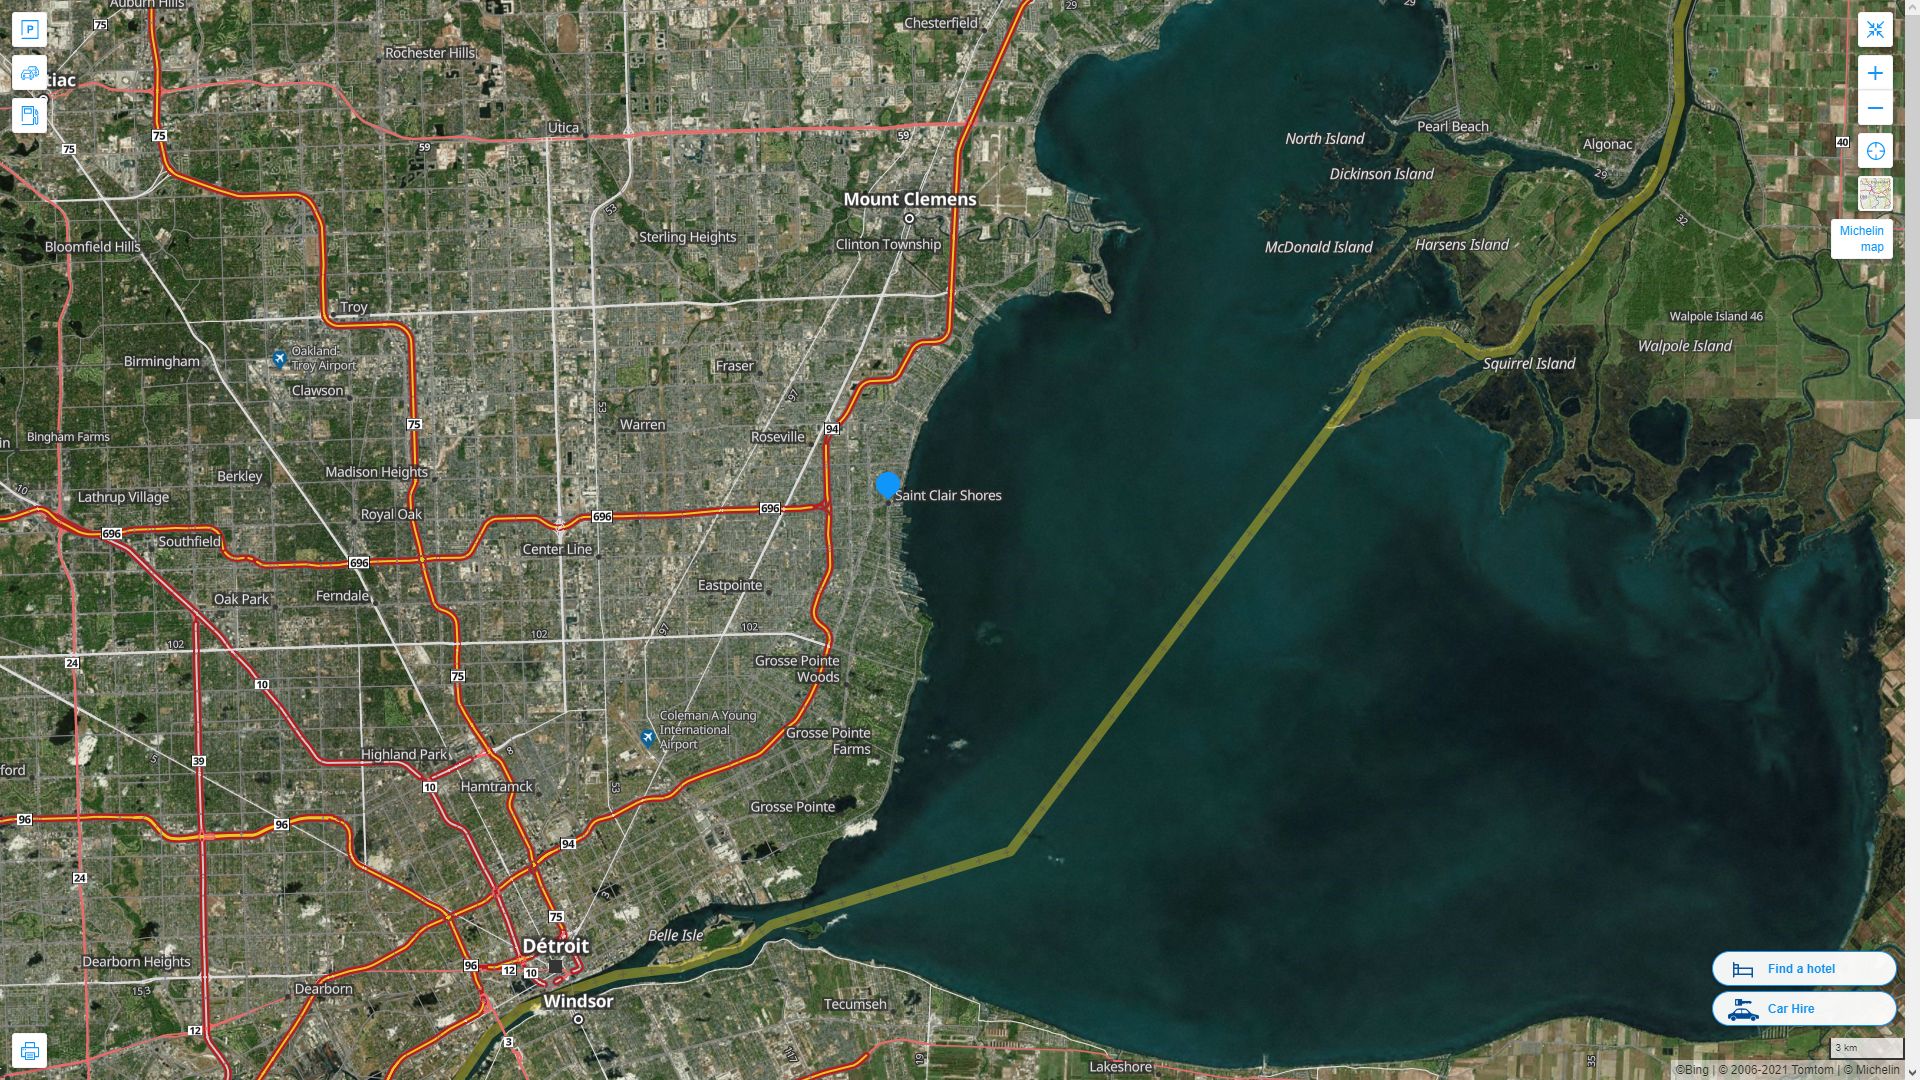 St. Clair Shores Michigan Highway and Road Map with Satellite View